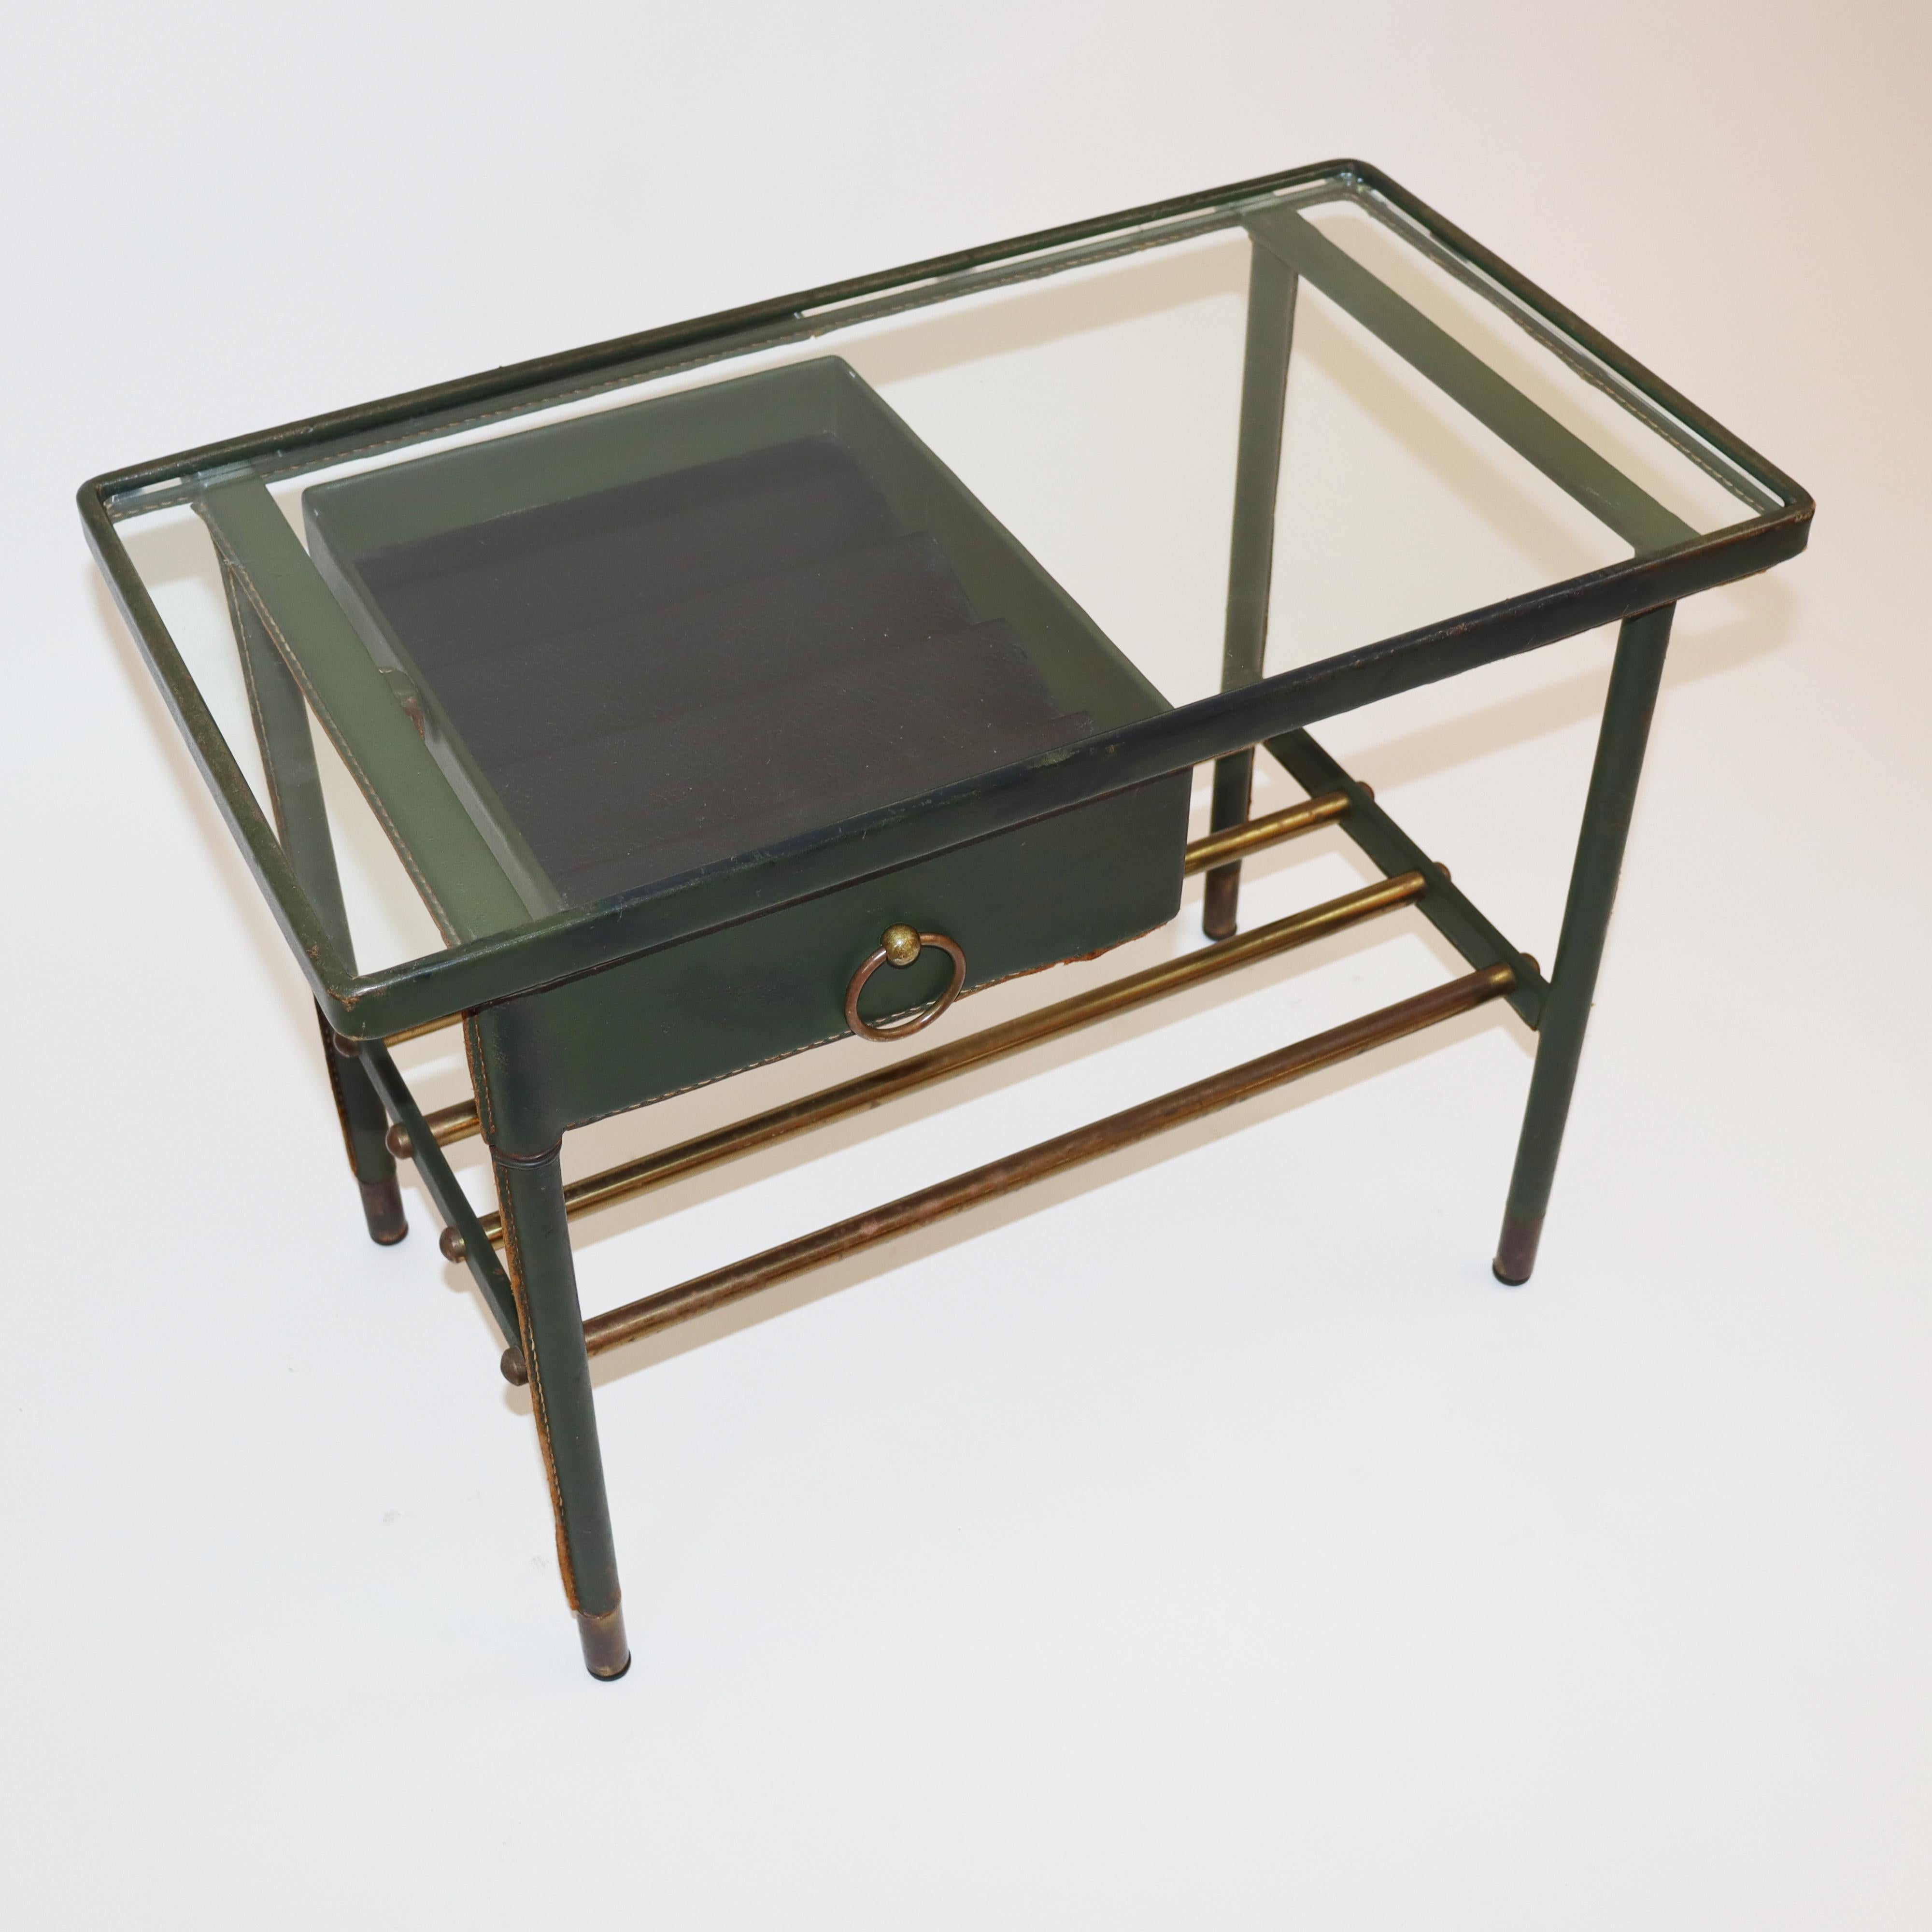 Jacques Adnet Handstitched Green Leather Nightstand, 1950s, France For Sale 1